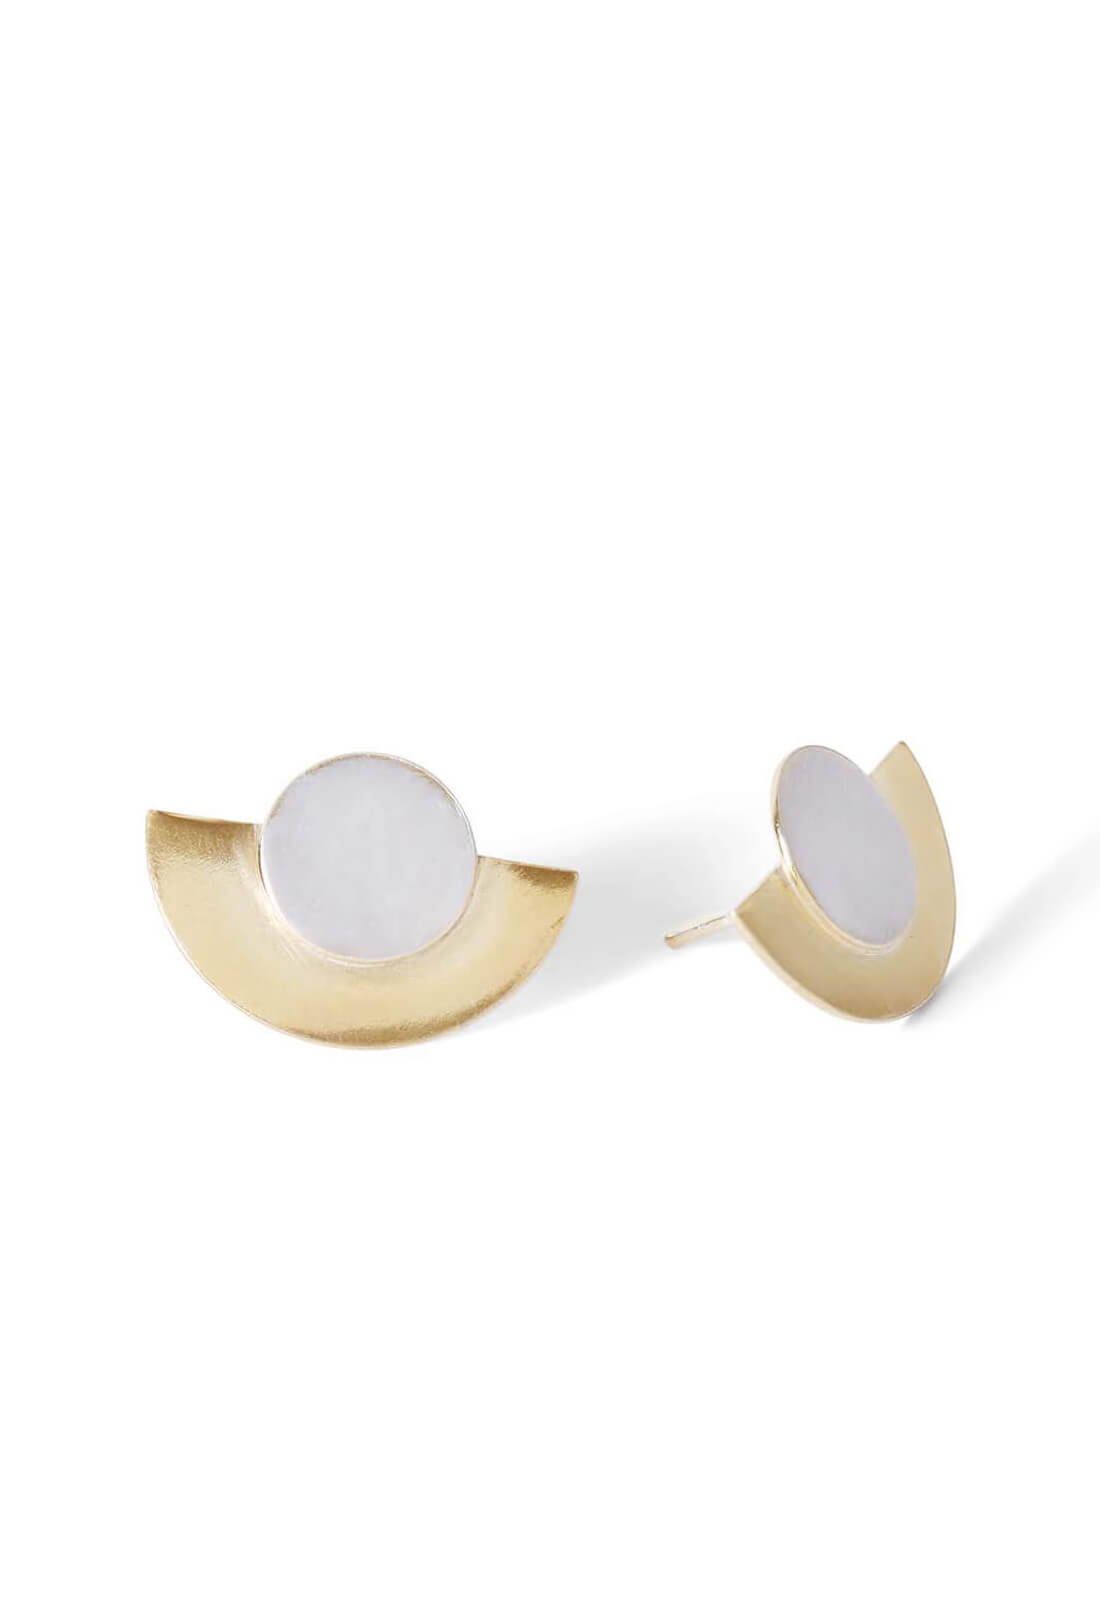 Handcrafted Disk and Dot Stud Earrings, Silver and Gold